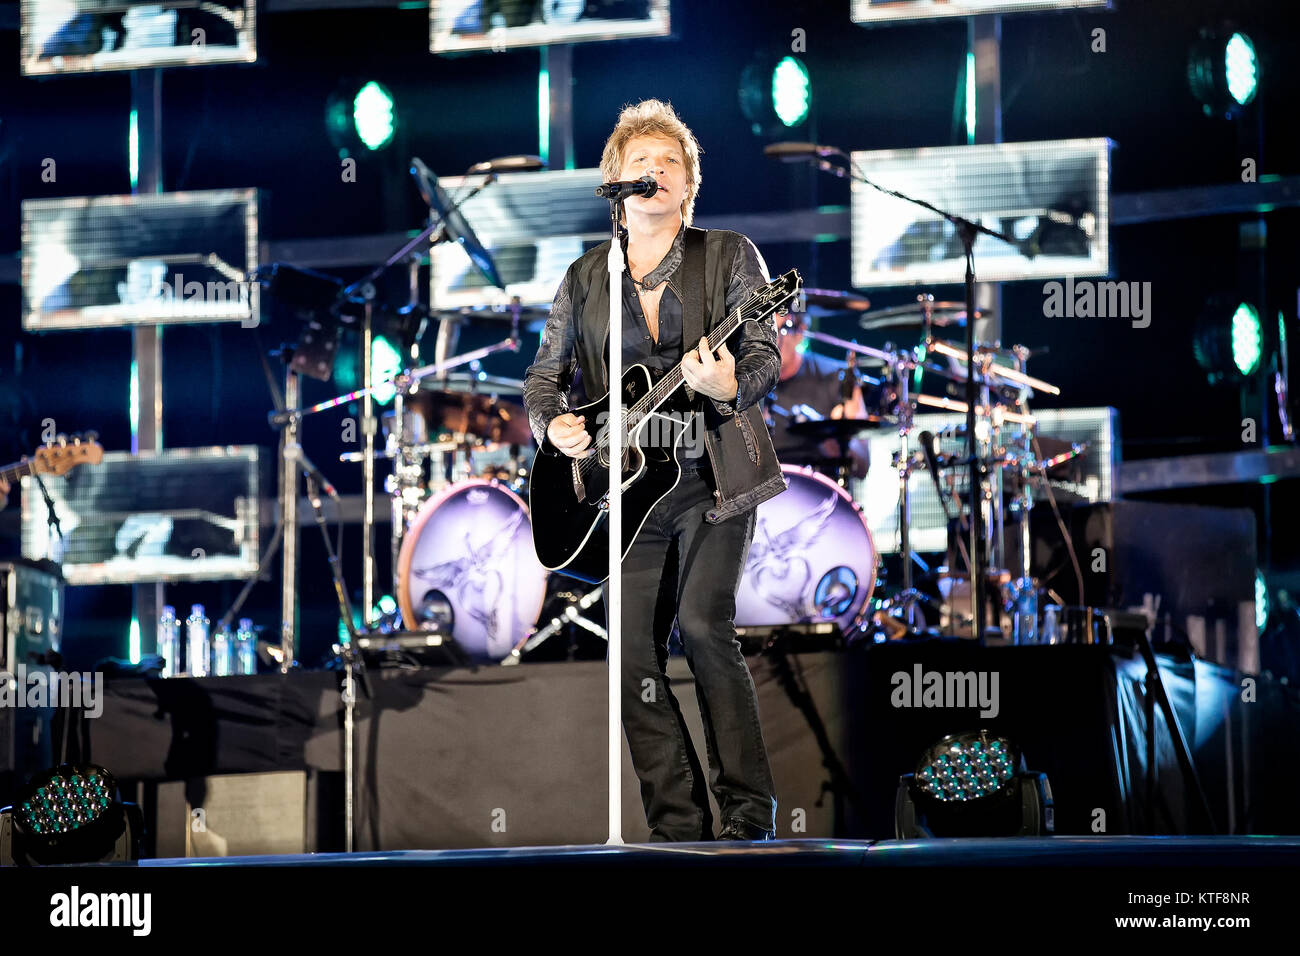 The American rock band Bon Jovi performs a live concert at Telenor Arena in Oslo. Here lead singer and musician Jon Bon Jovi is seen live on stage. Norway, 21/05 2013. Stock Photo